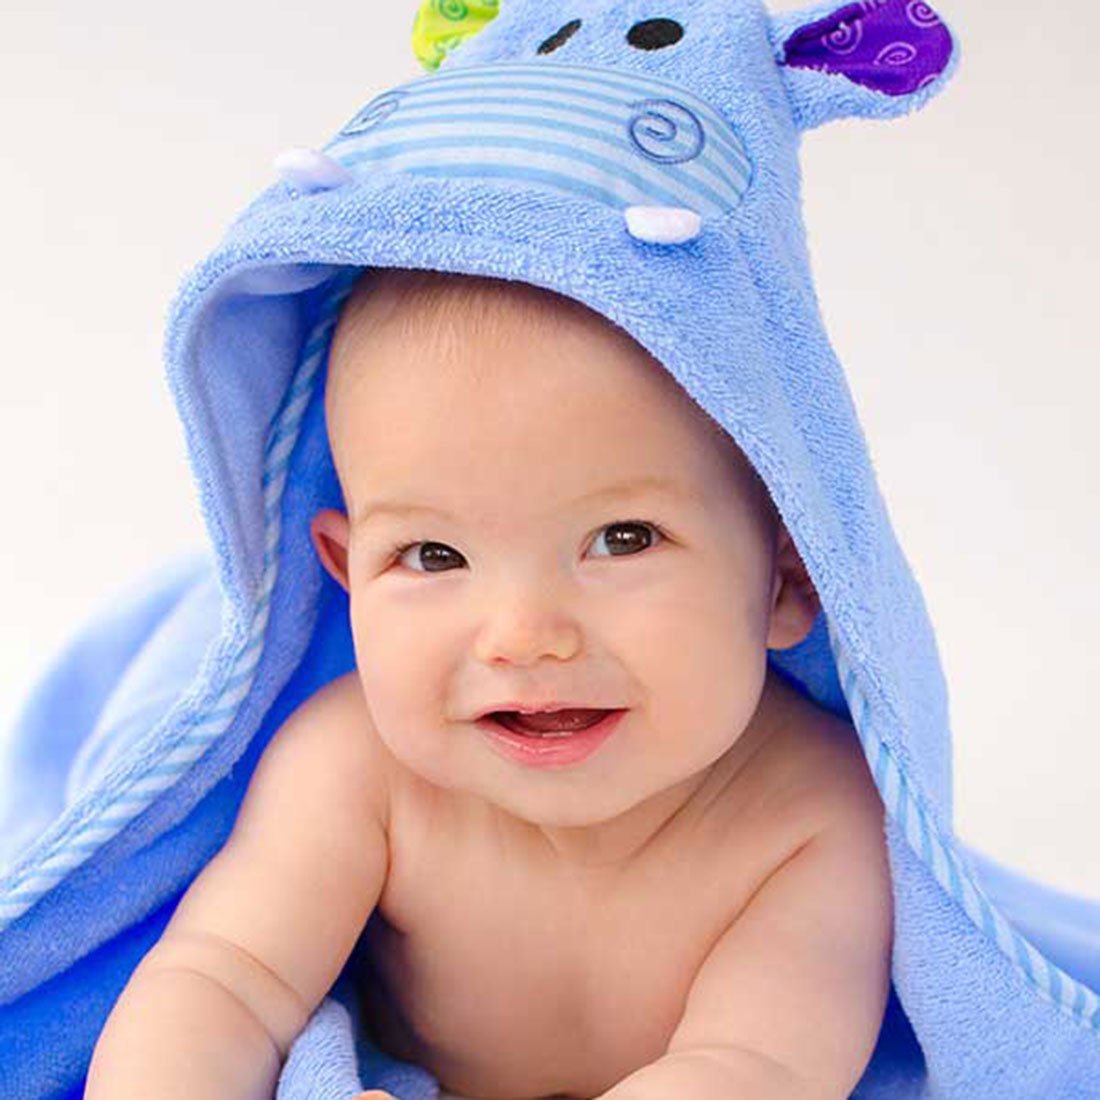 This is Hooded Terrycloth Animal Baby Towel